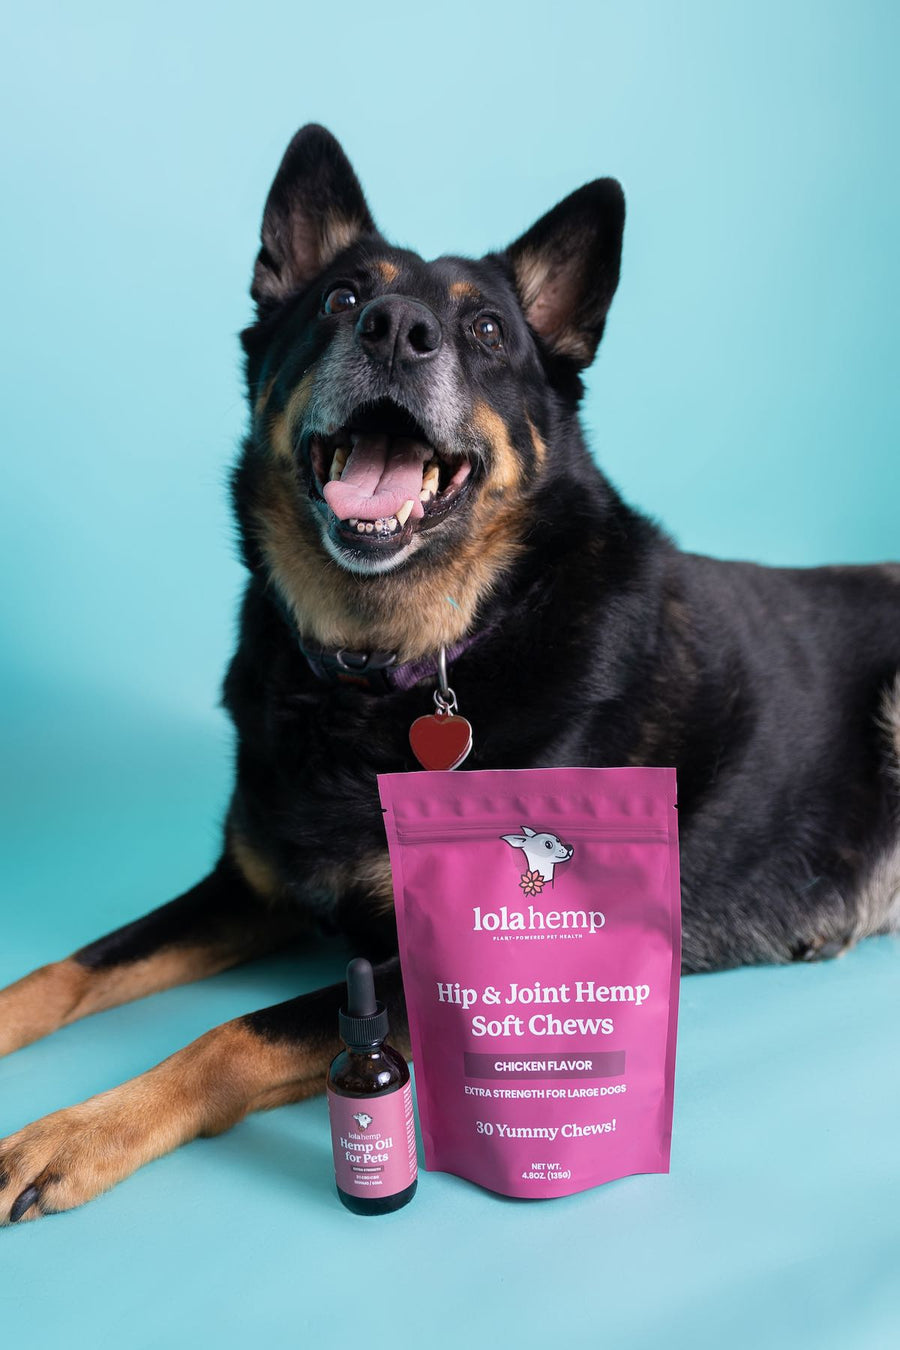 extra strength lolahemp oil bottle, next to an extra-strength bag of soft chews and a German Shepherd laying next to them, smiling. 